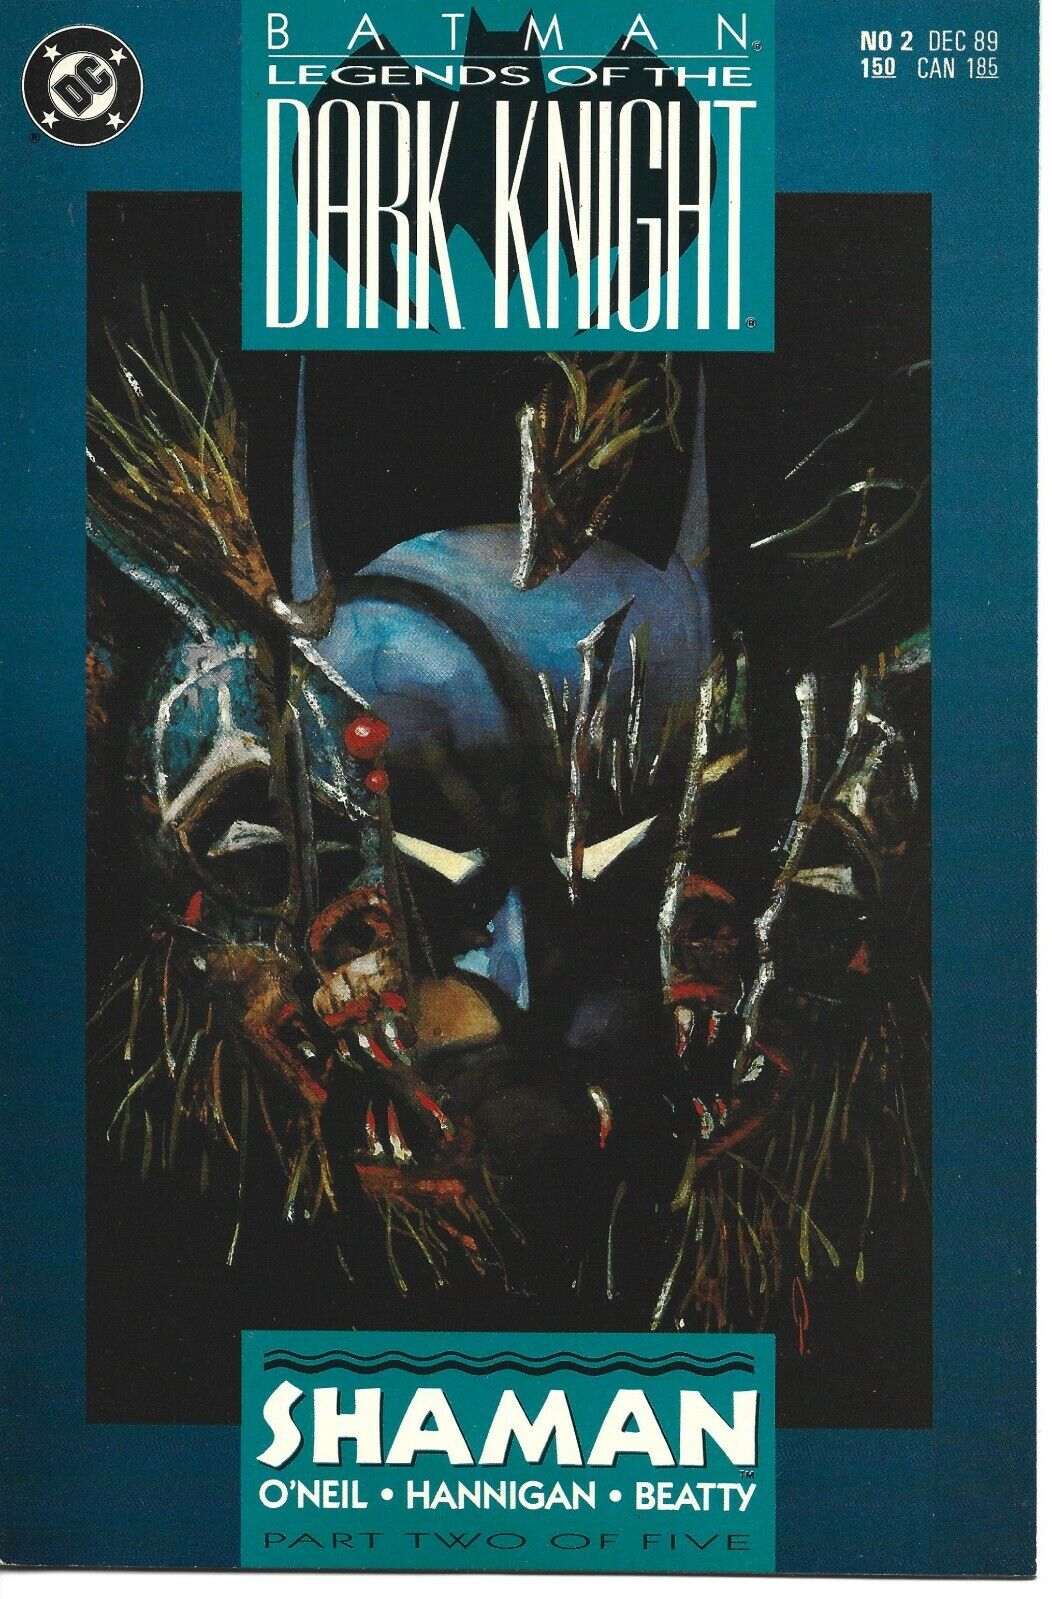 BATMAN LEGENDS OF THE DARK KNIGHT #2 DC COMICS 1989 BAGGED AND BOARDED